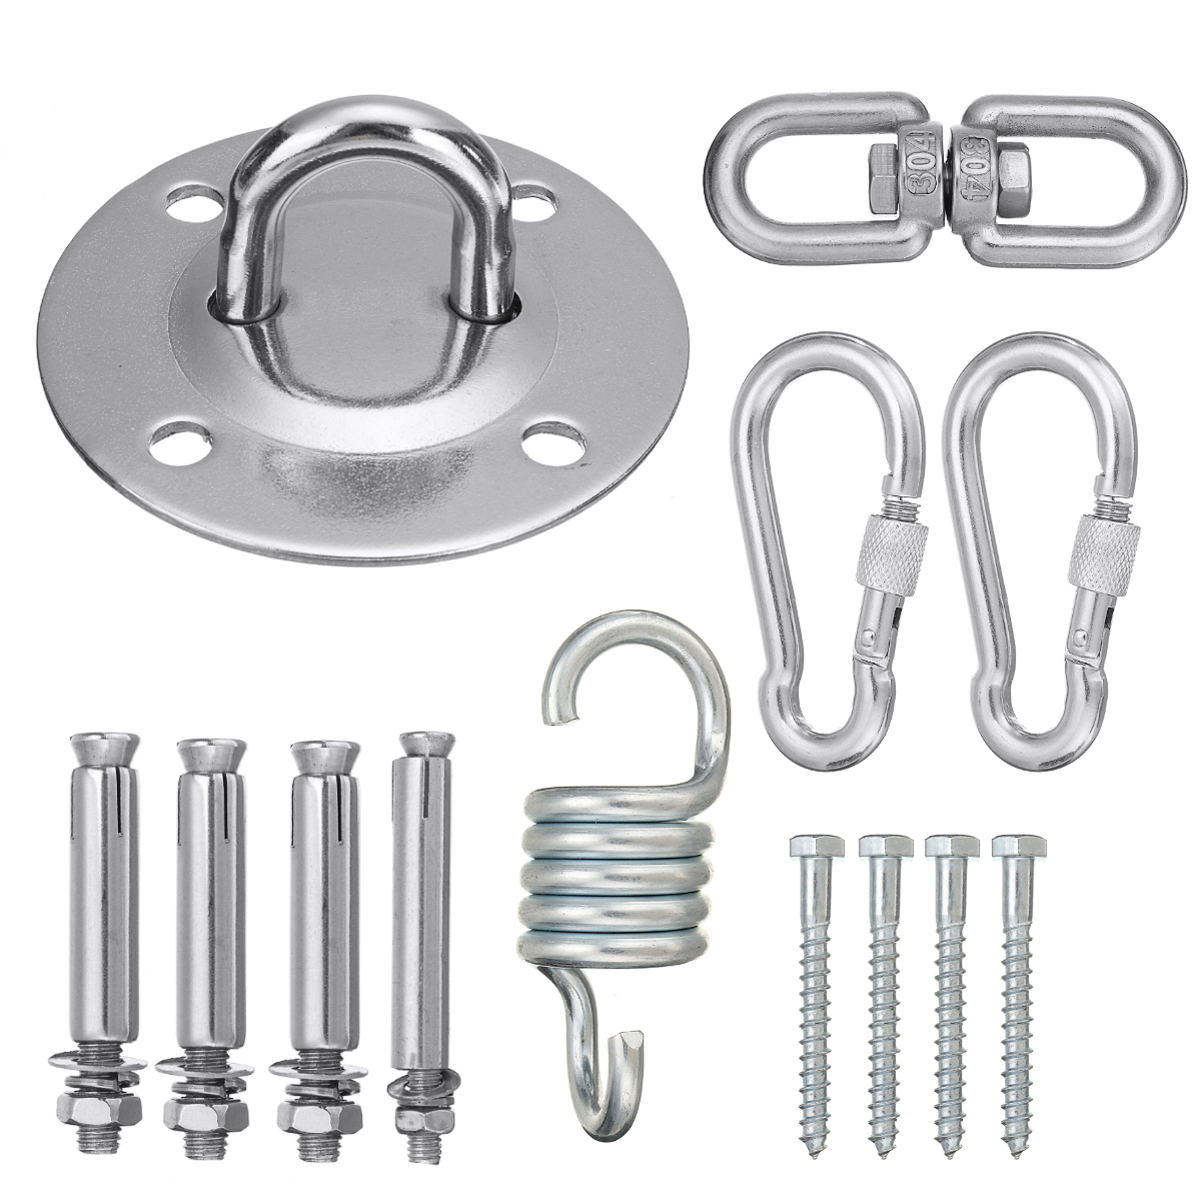 13Pcs-Hammock-Chair-Hanging-Basket-Accessories-Stainless-Steel-Fixed-Buckles-1782407-5